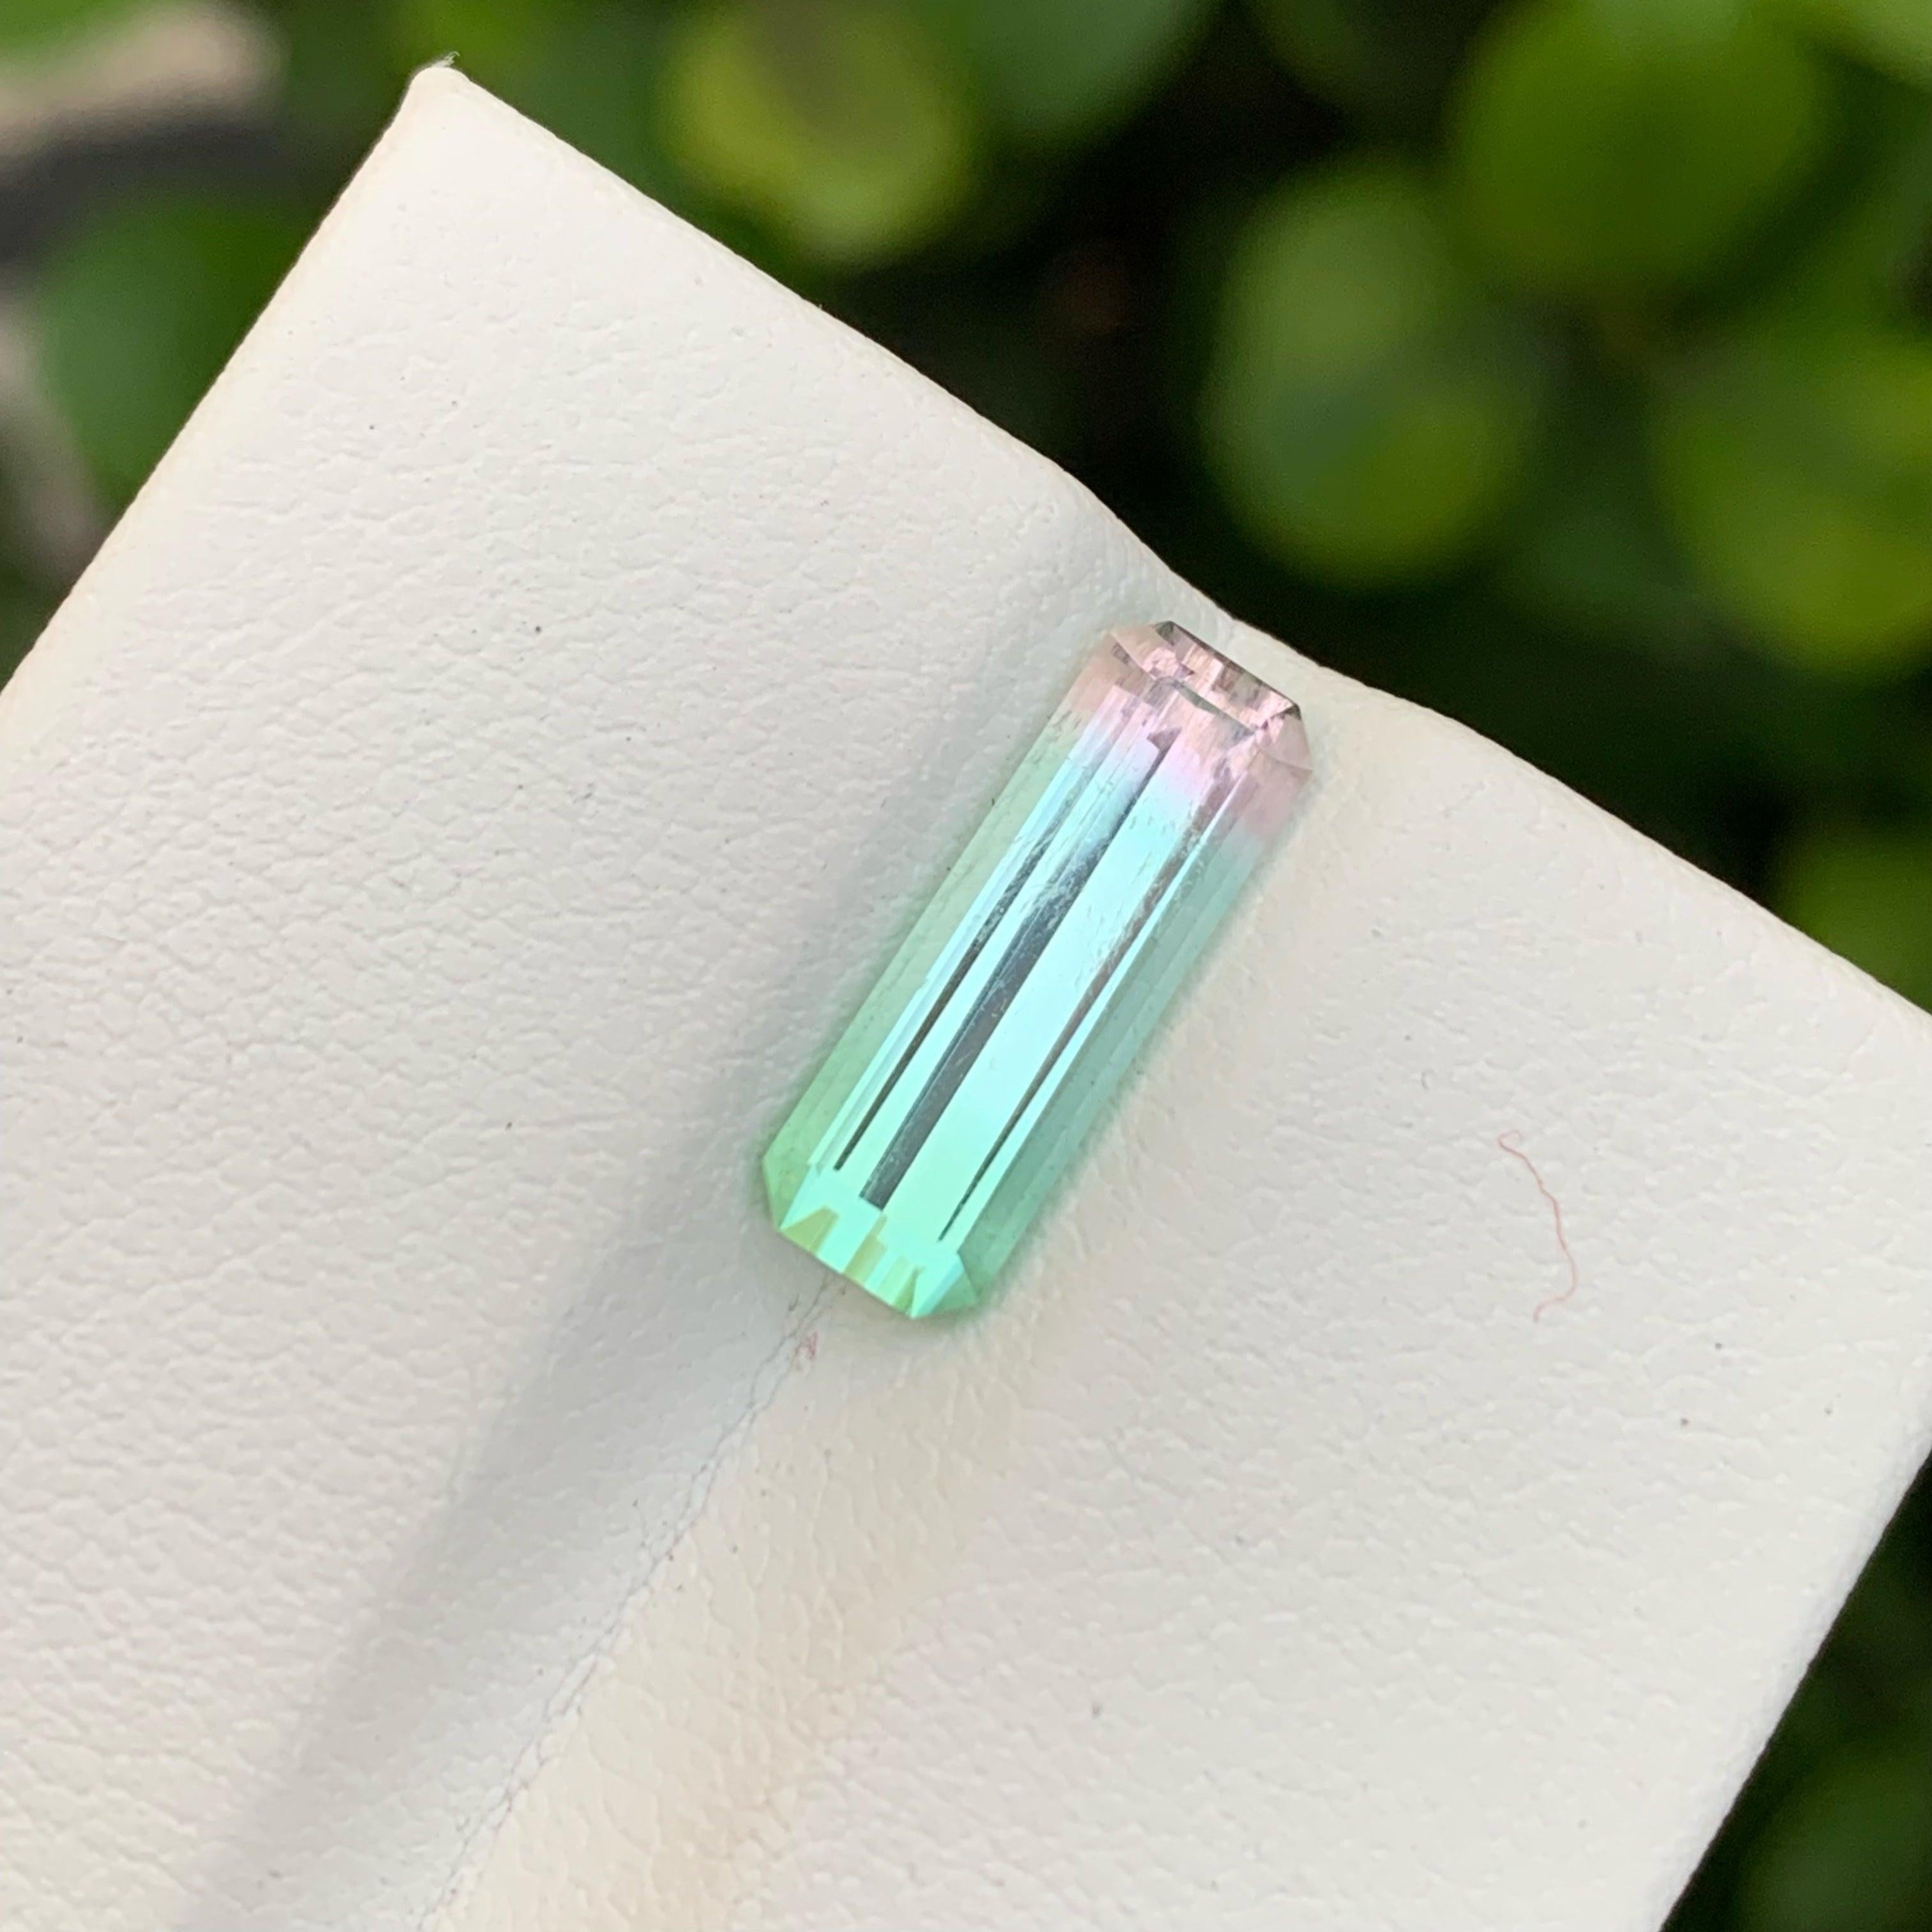 Beautiful Bicolor Loose Tourmaline Gemstone, Available For Sale At Wholesale Price Natural High Quality 3.25 Carats Eye Clean Clarity Loose Tourmaline From Afghanistan.

Product Information:
GEMSTONE TYPE:	Beautiful Bicolor Loose Tourmaline